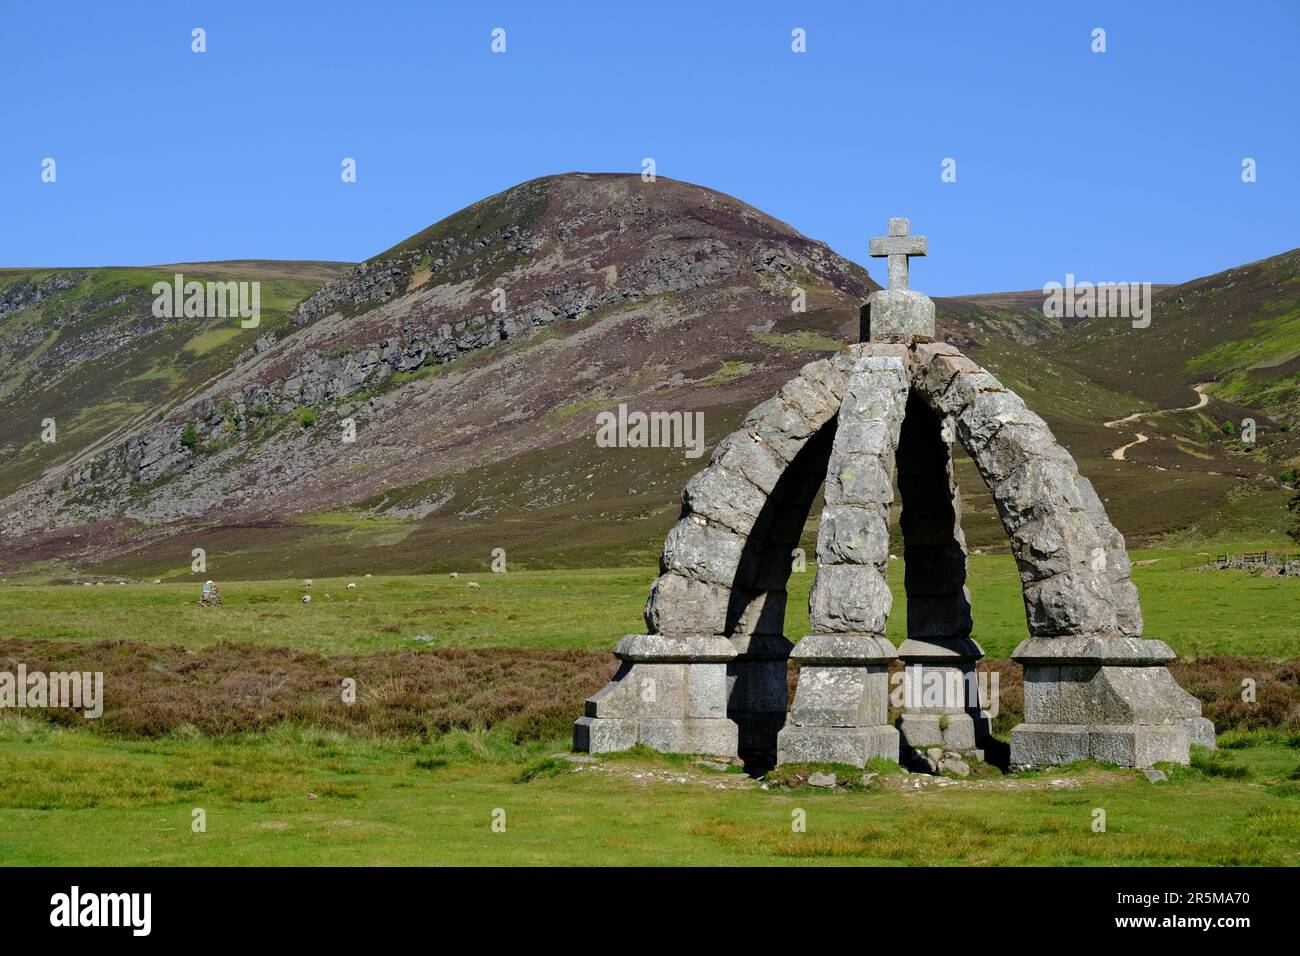 The Queen's Well, Glen Mark, Angus Glens Scotland. Built by Lord Dalhousie to commemorate a visit by Queen Victoria and Prince Albert in 1861. Stock Photo